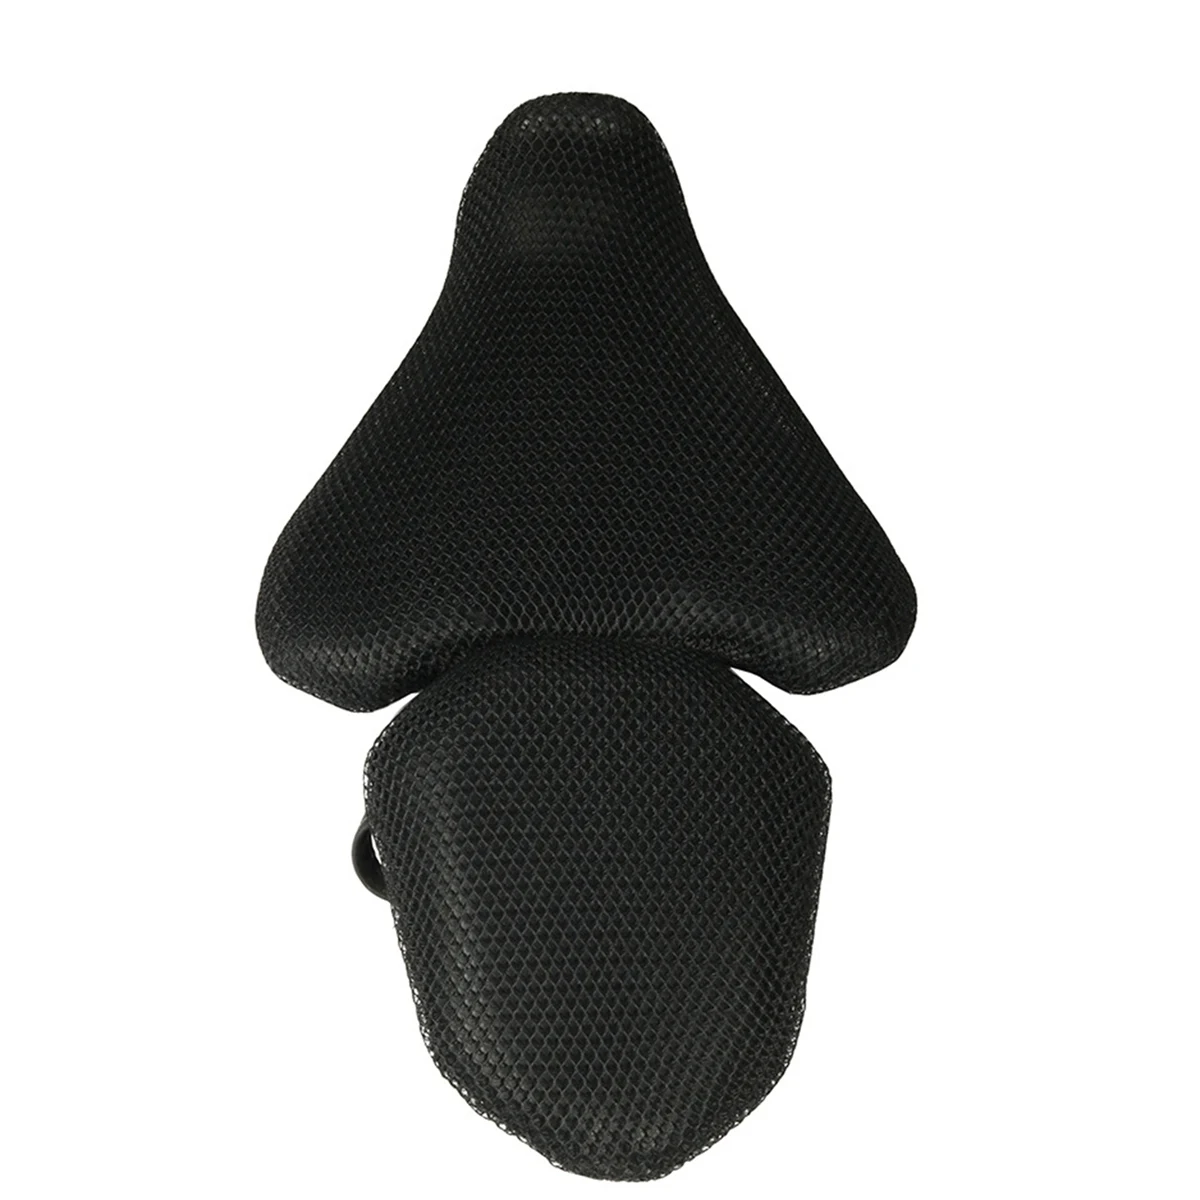 Motorcycle 3D Mesh Net Seat Cover Cushion Guard Pad Insulation Breathable for YAMAHA MT-07 MT07